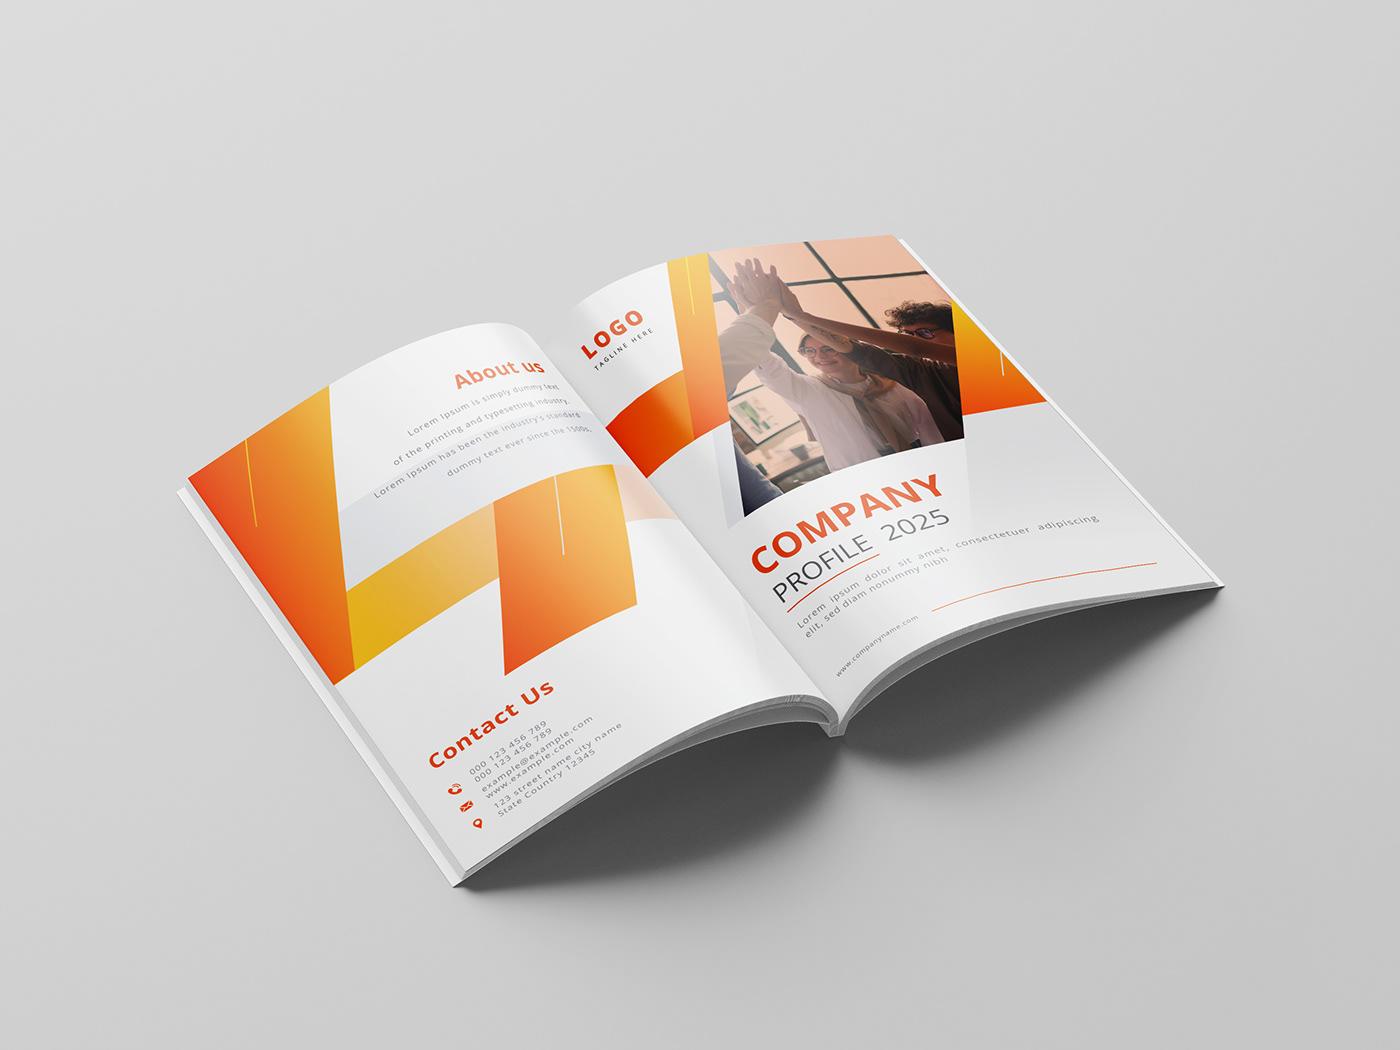 Download Company Profile Design With Free Mockup On Behance